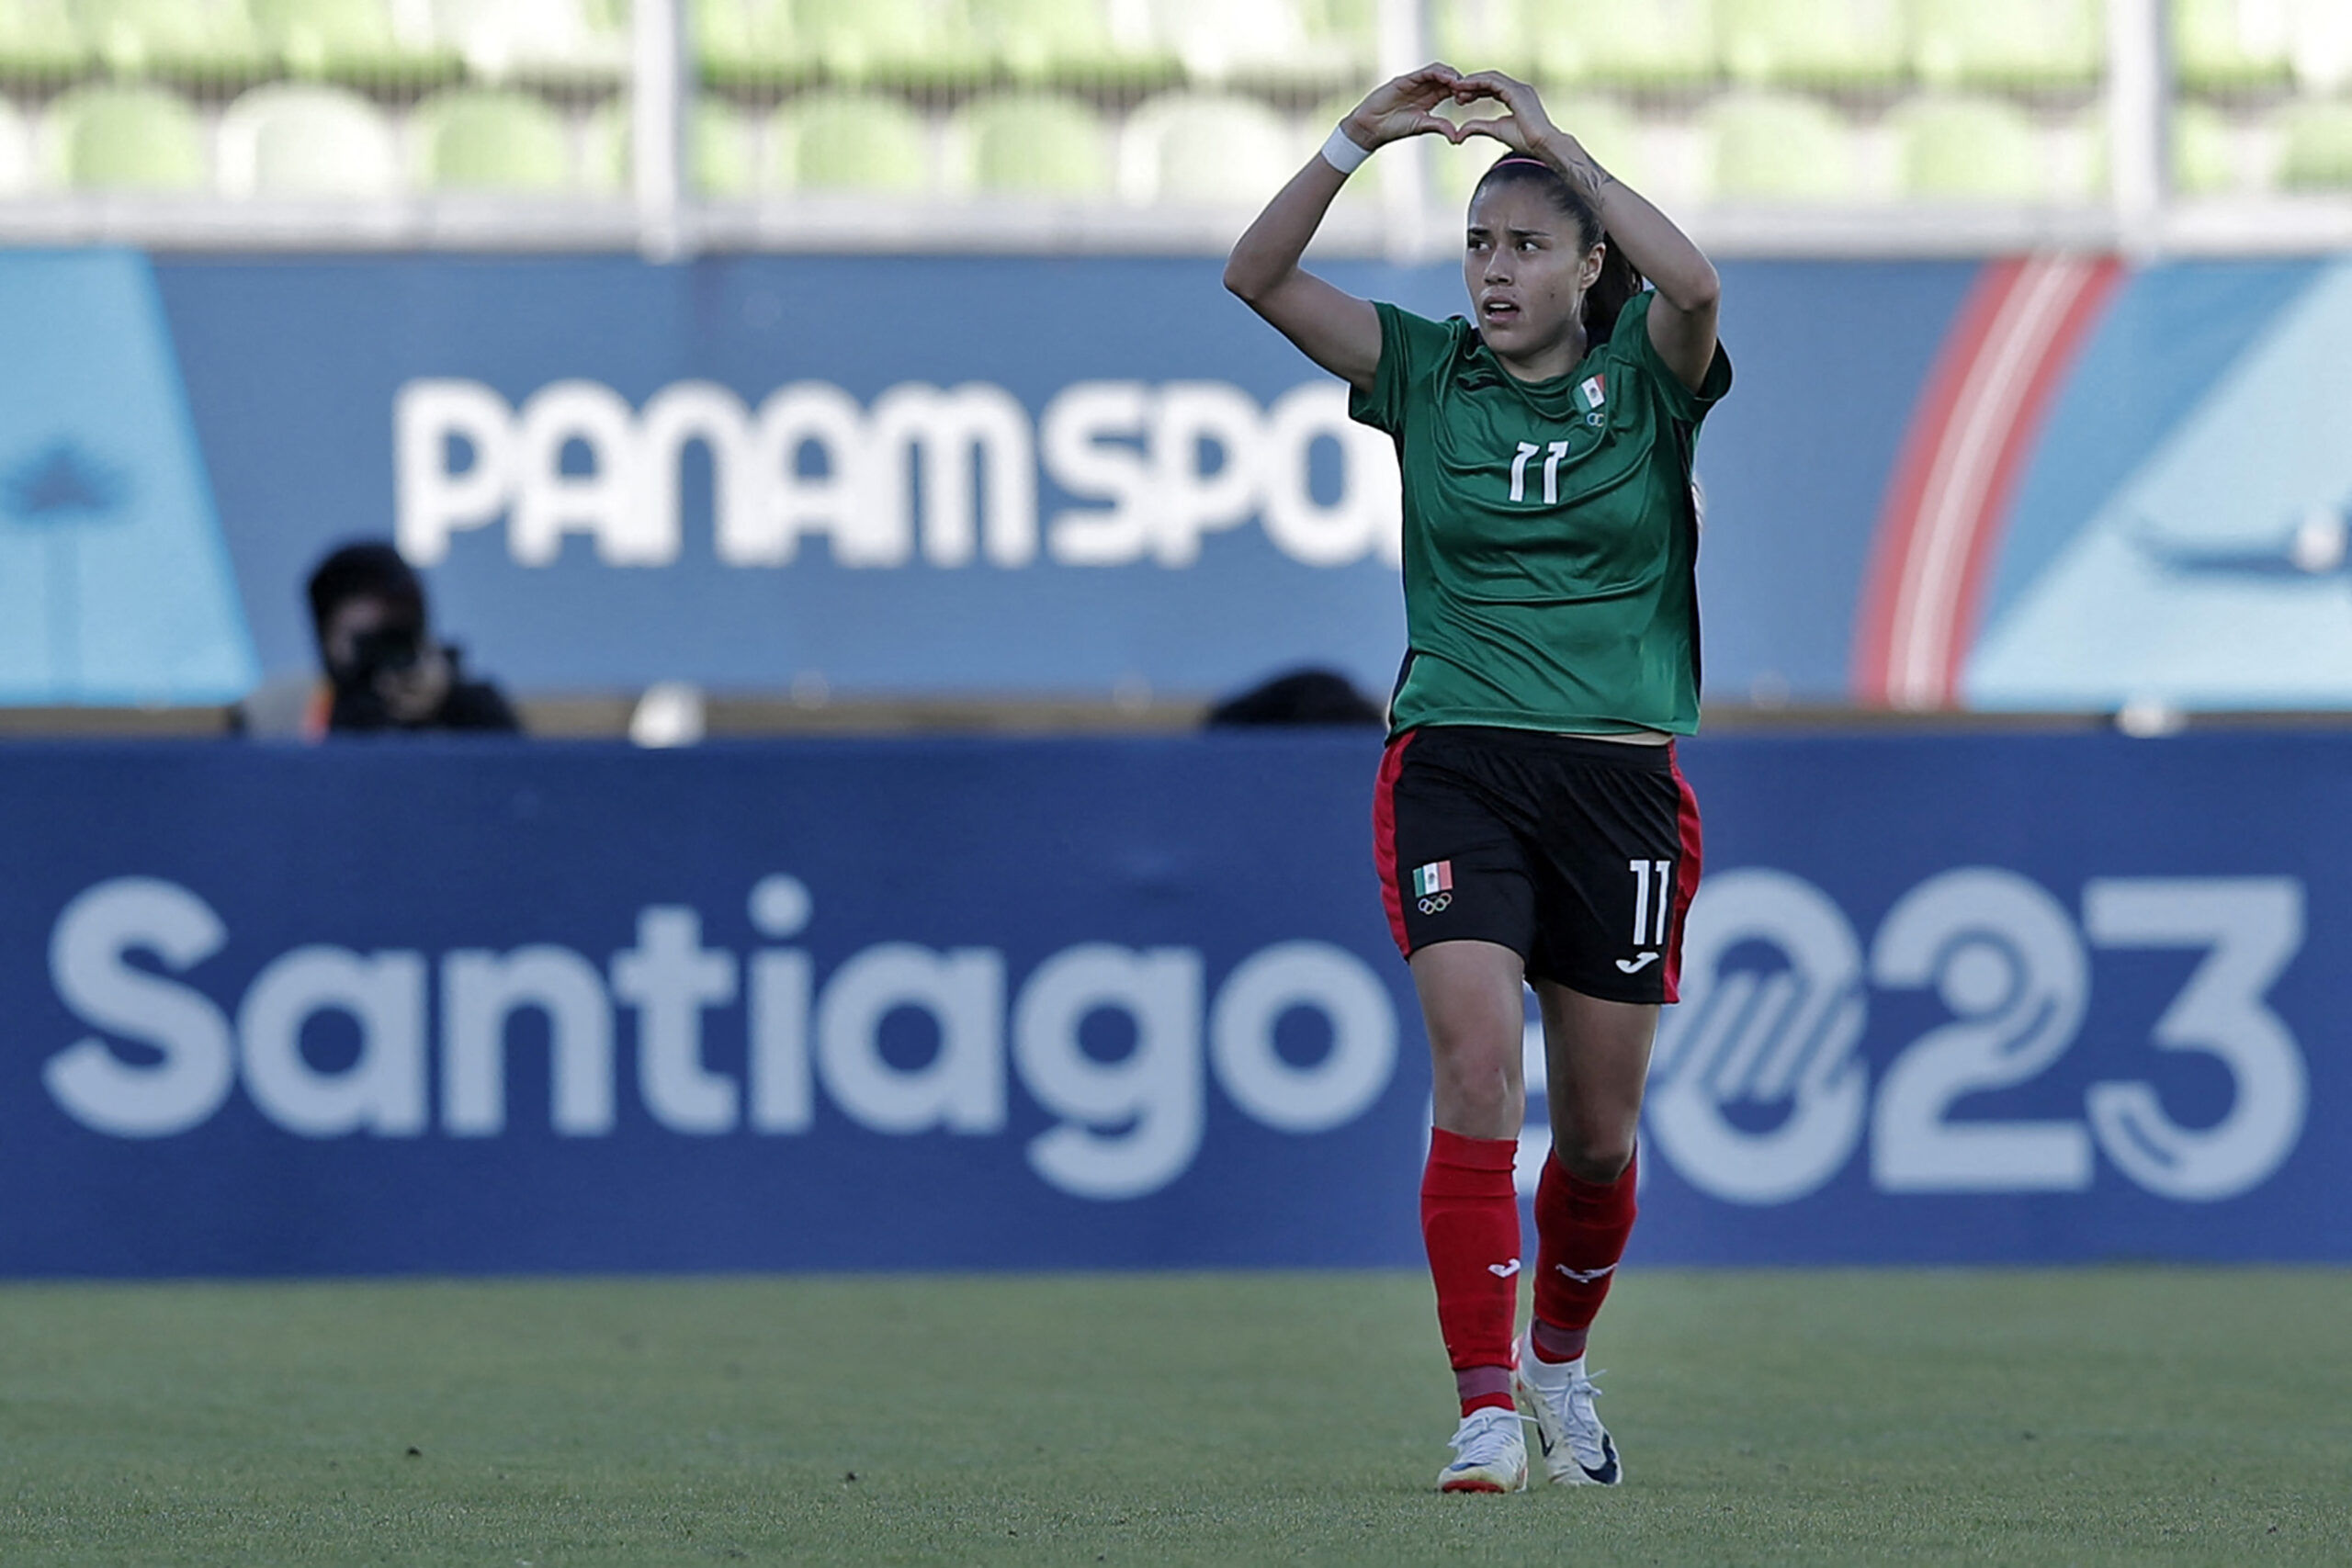 mexico's-women's-team-defeated-argentina-and-will-compete-for-gold-in-the-pan-american-games